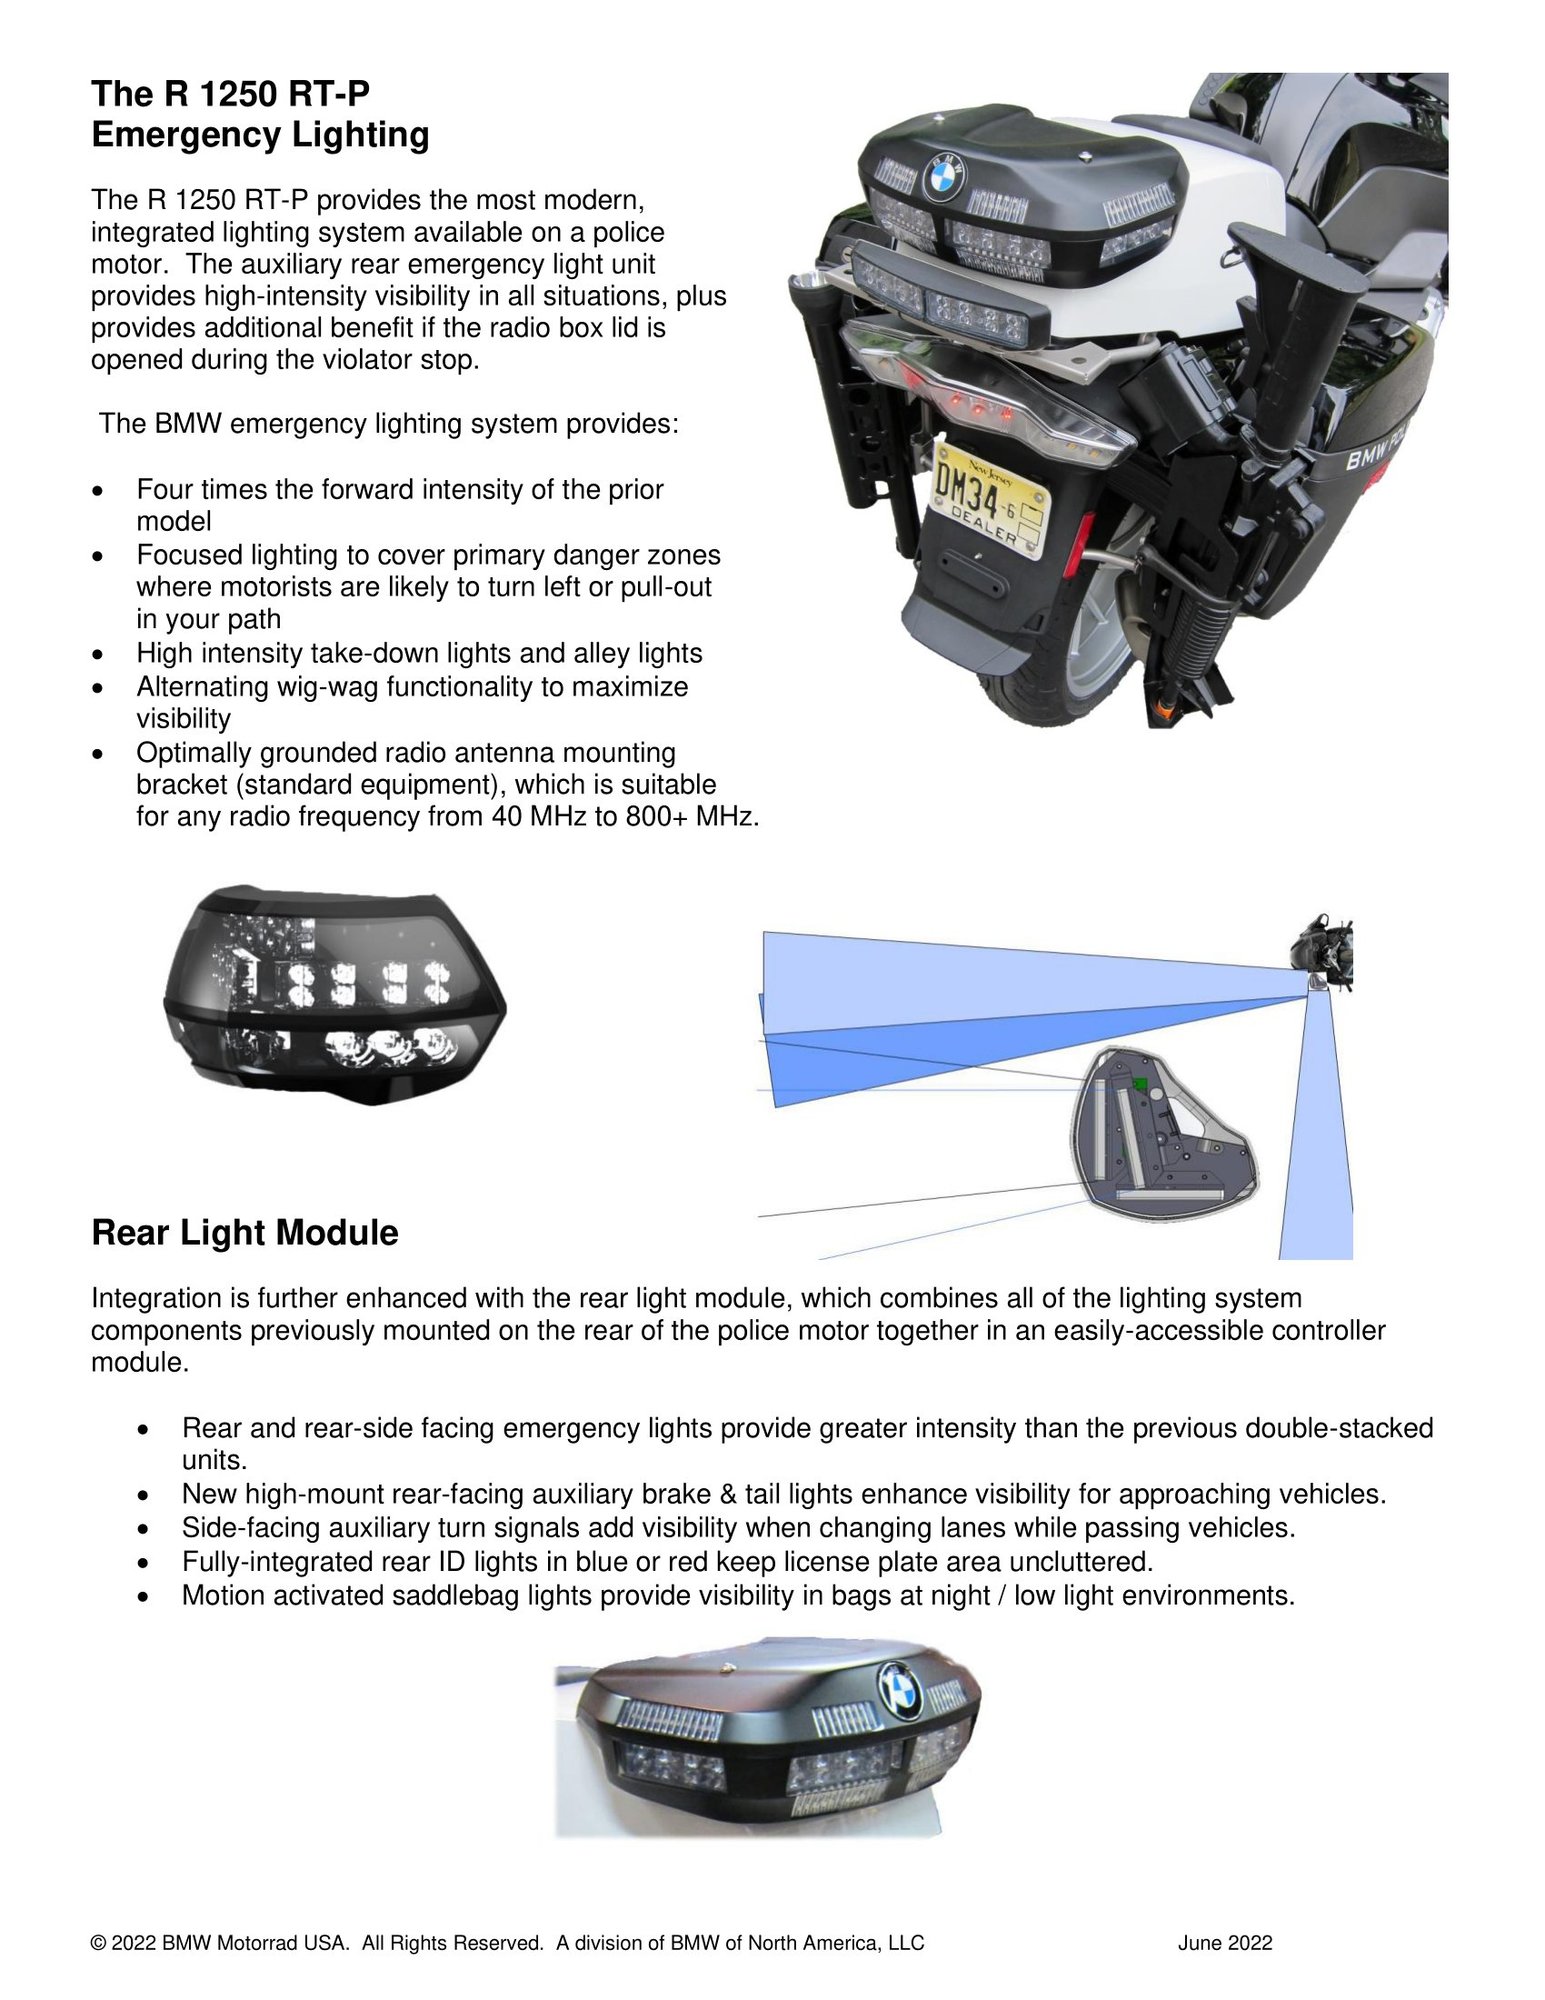 The R 1250 RT-P page 3